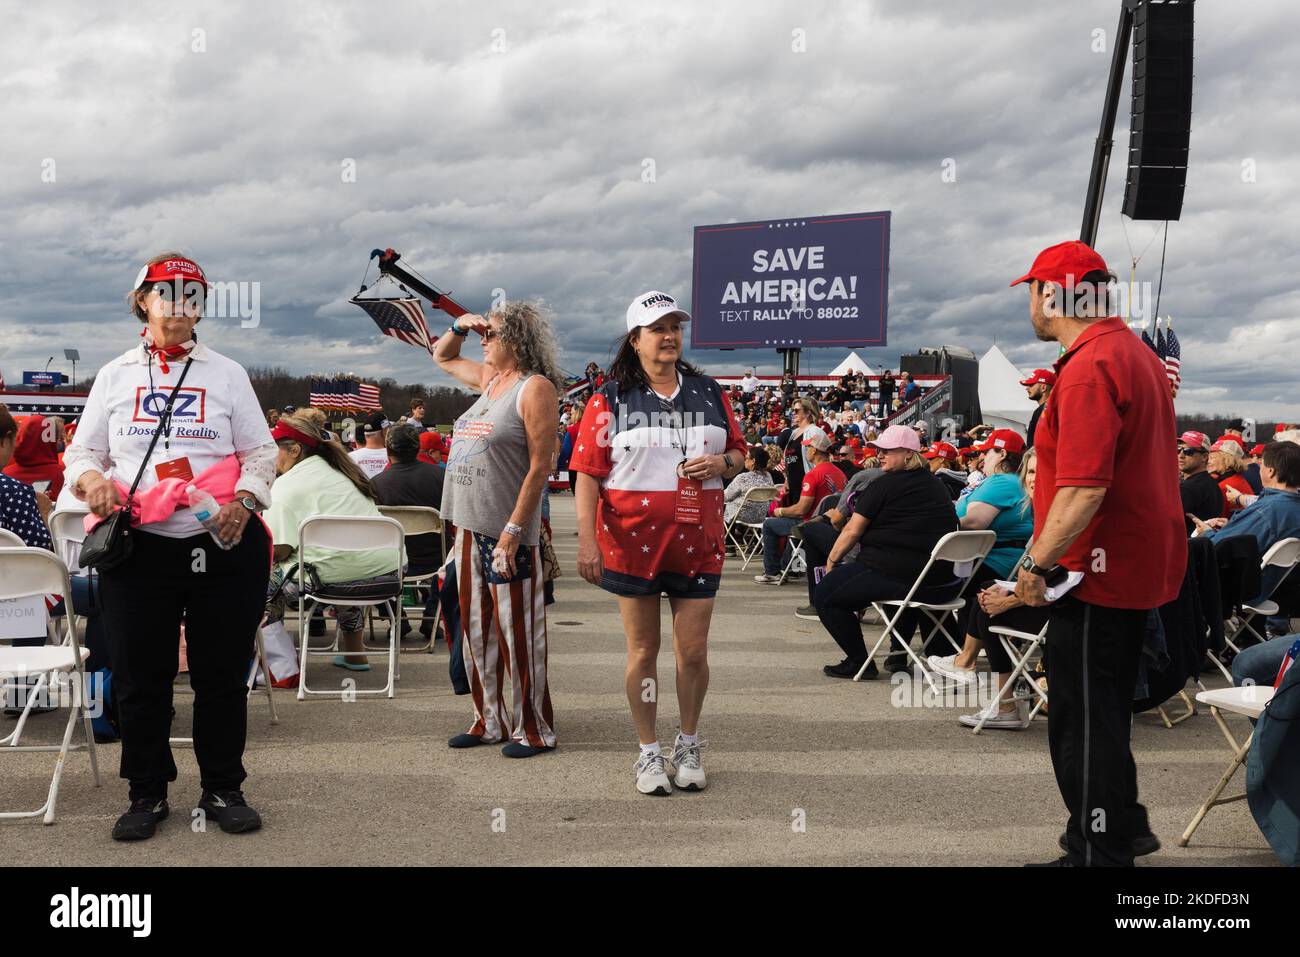 Latrobe, United States. 05th Nov, 2022. Visitors wait for guest speaker Doug Mastriano, a candidate for governor of Pennsylvania, at a rally organized by Trump at the Arnold Palmer Regional Airport in Latrobe, PA on Nov. 5, 2022. (Photo by Elke Scholiers/Sipa USA) Credit: Sipa USA/Alamy Live News Stock Photo